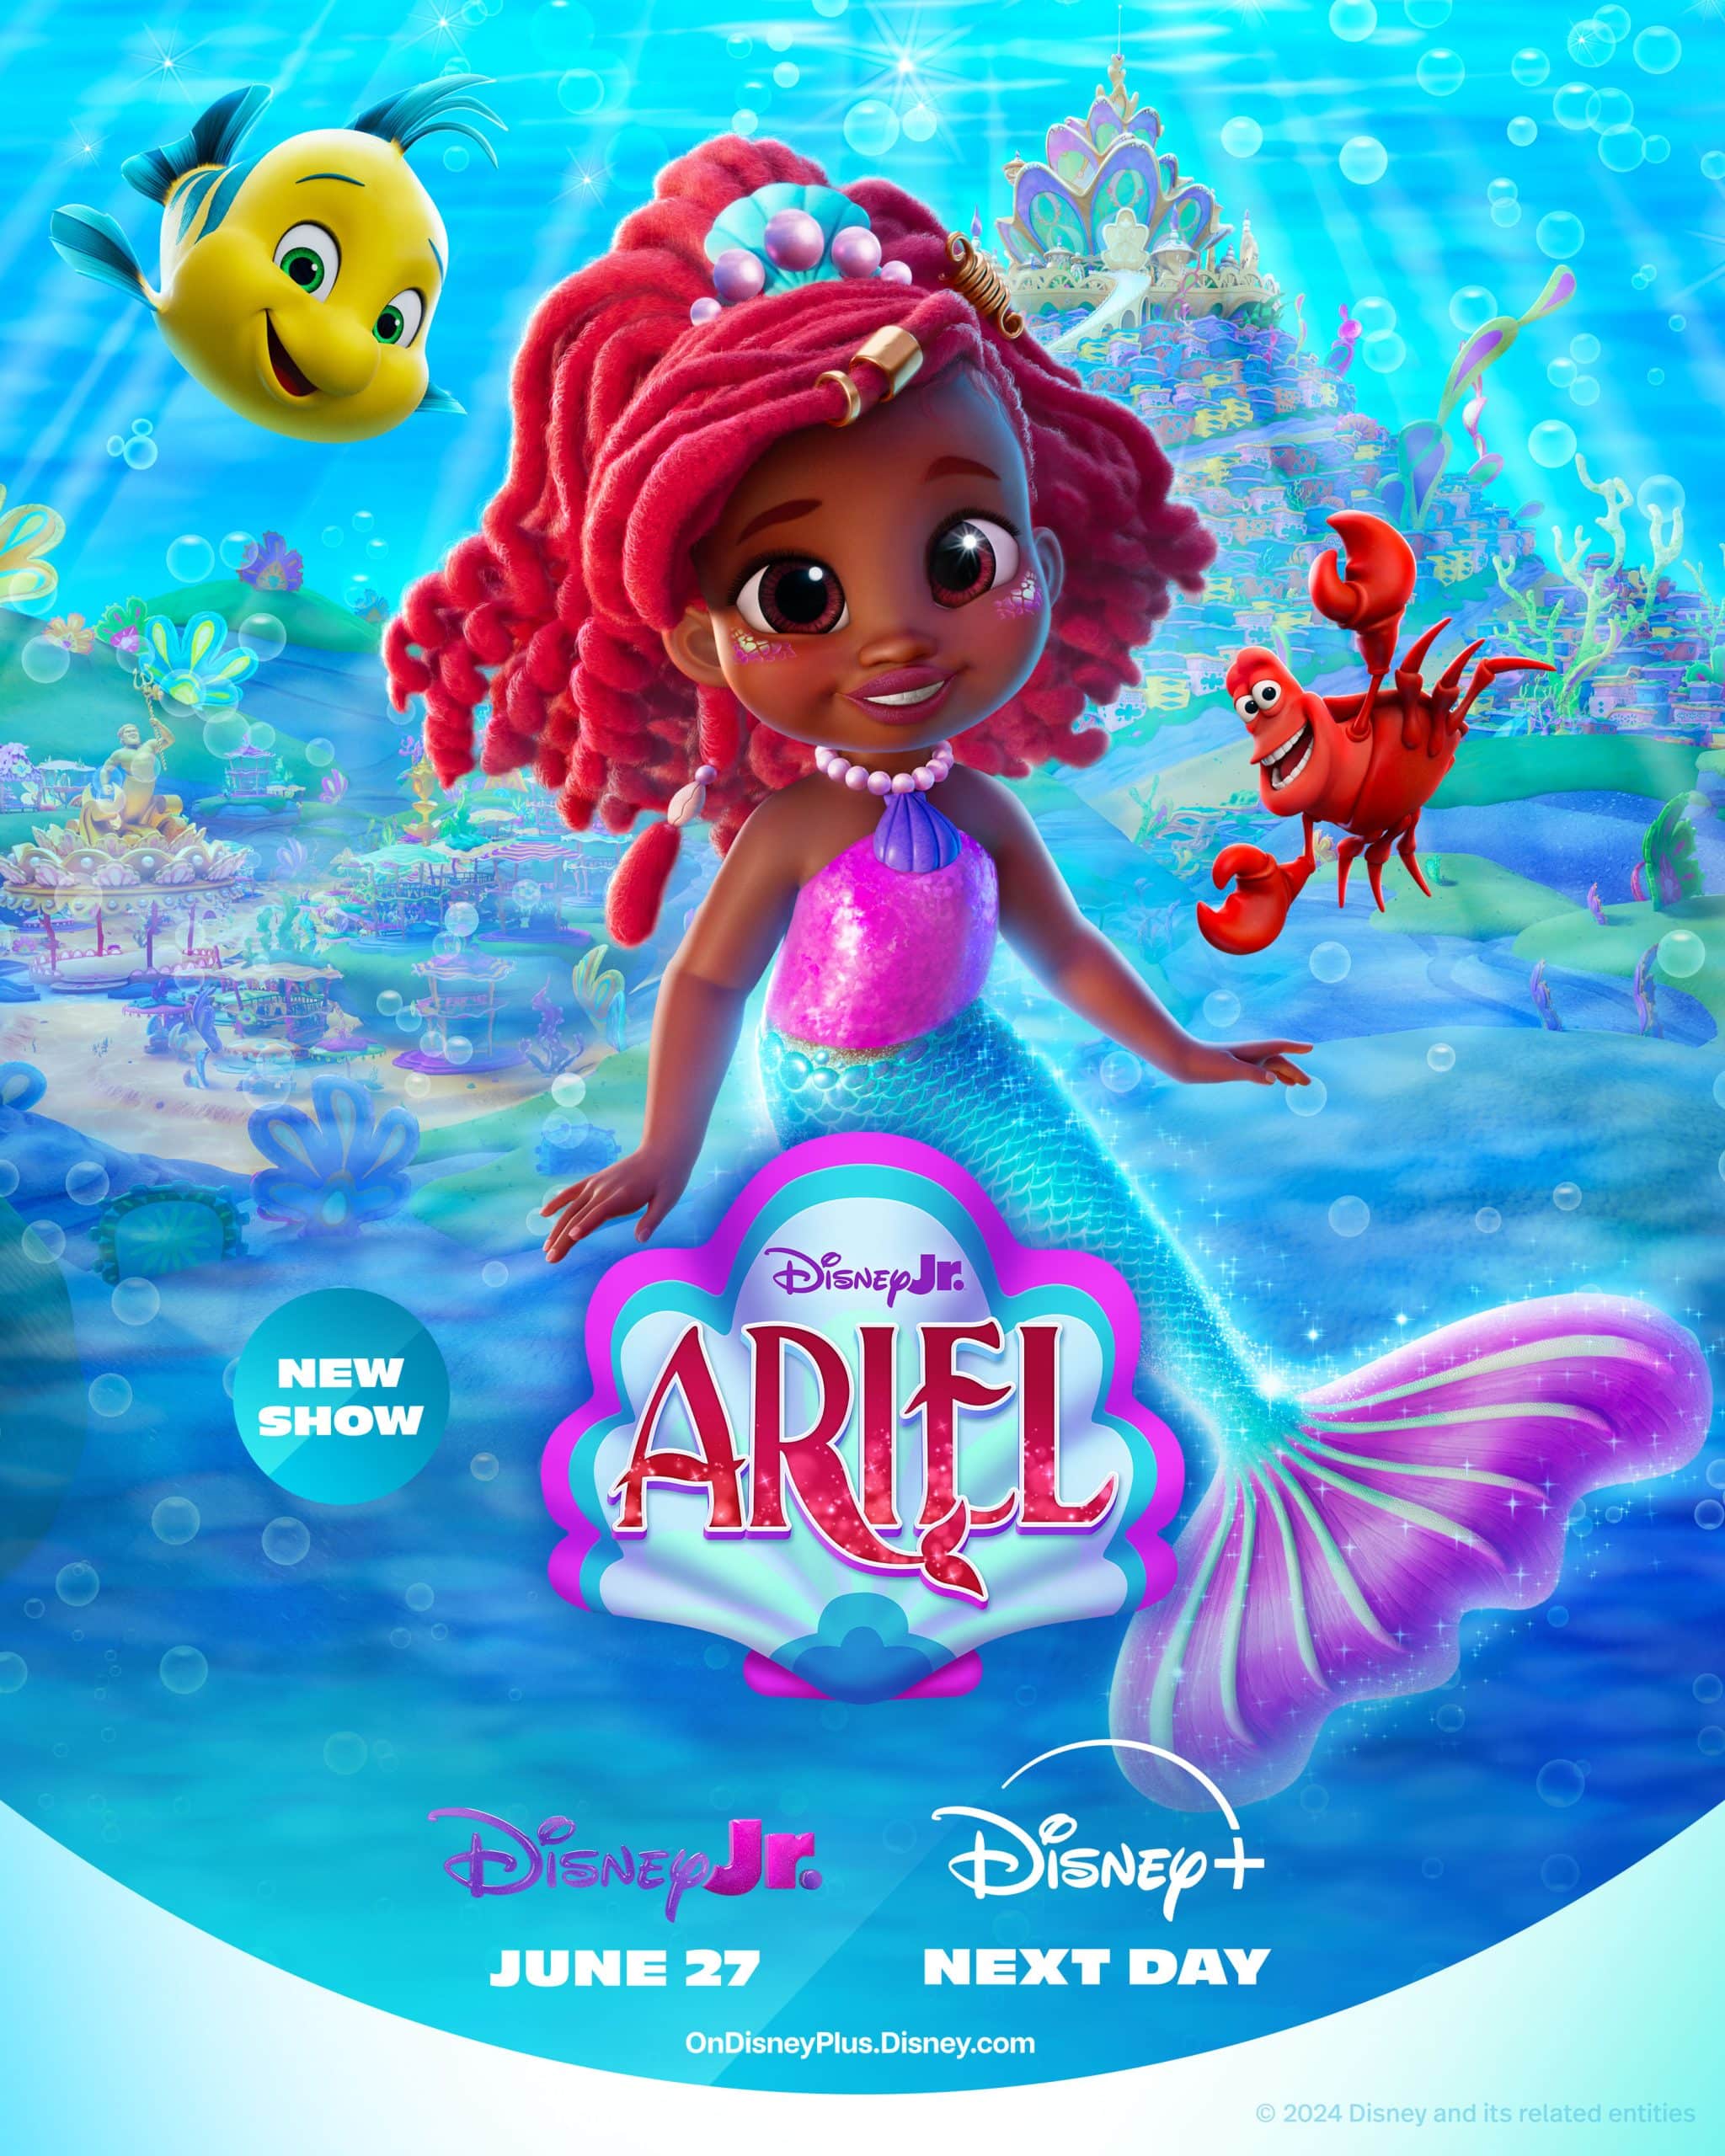 Colorful poster for the new Disney Junior show "Ariel" featuring a young mermaid with vibrant red hair and a purple tail, smiling underwater. A yellow fish and red crab accompany her. The background showcases an enchanting underwater kingdom. Premiering June 27 on Disney Junior and Disney+.